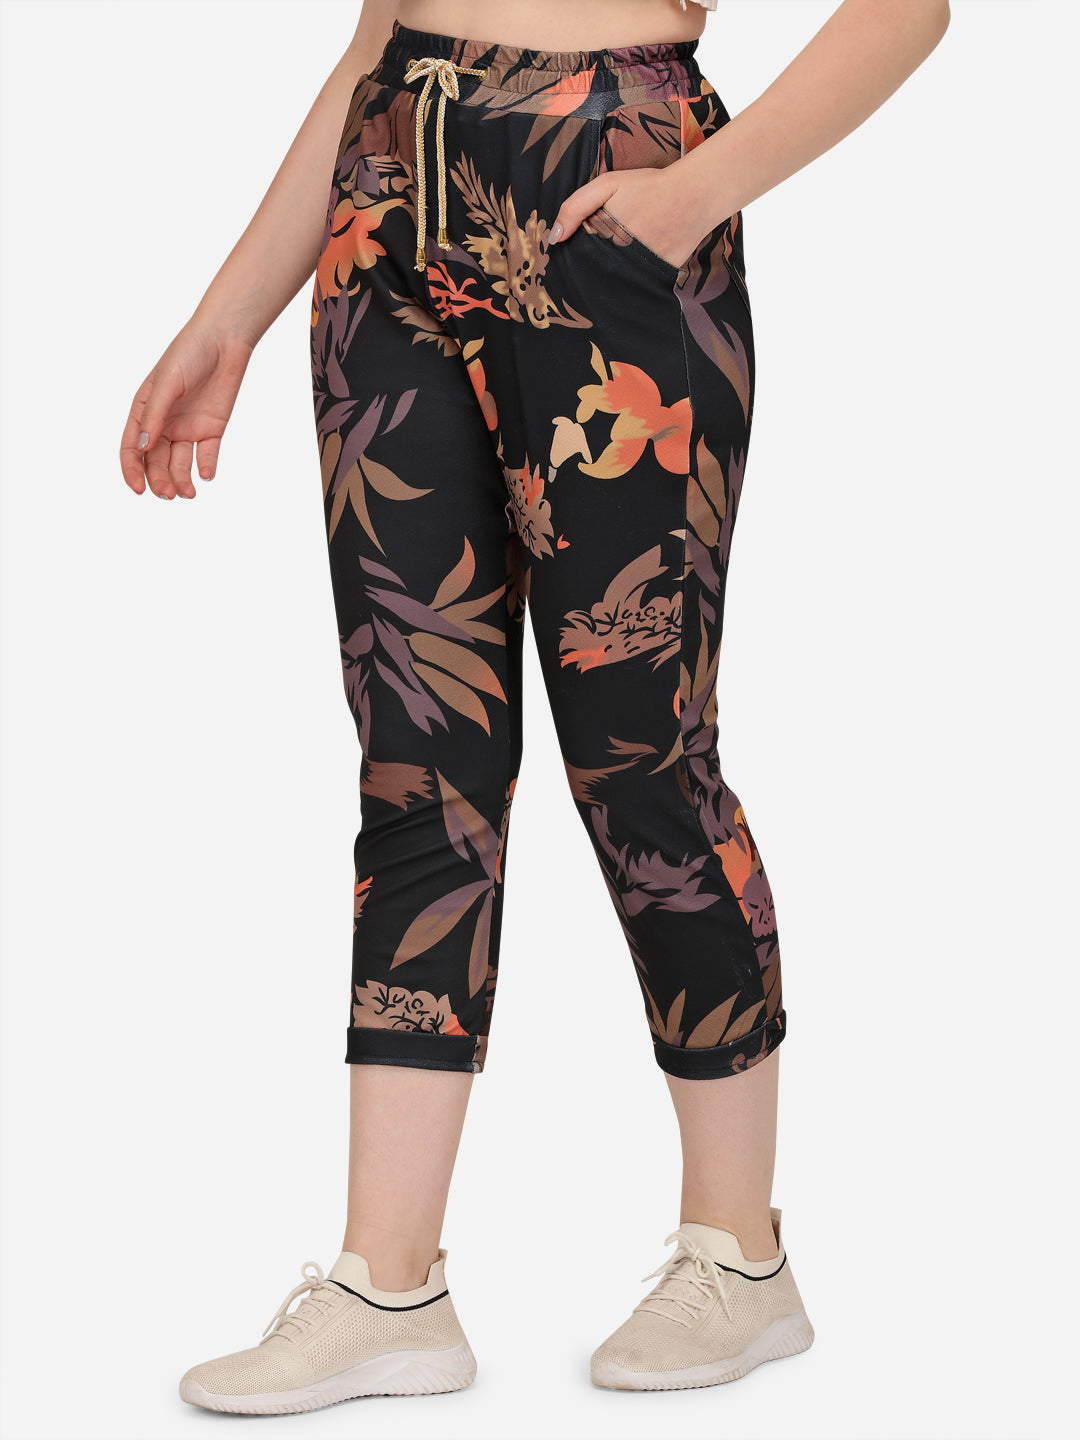 Women's Loose Lower Comfortable Western Classy Track Pants